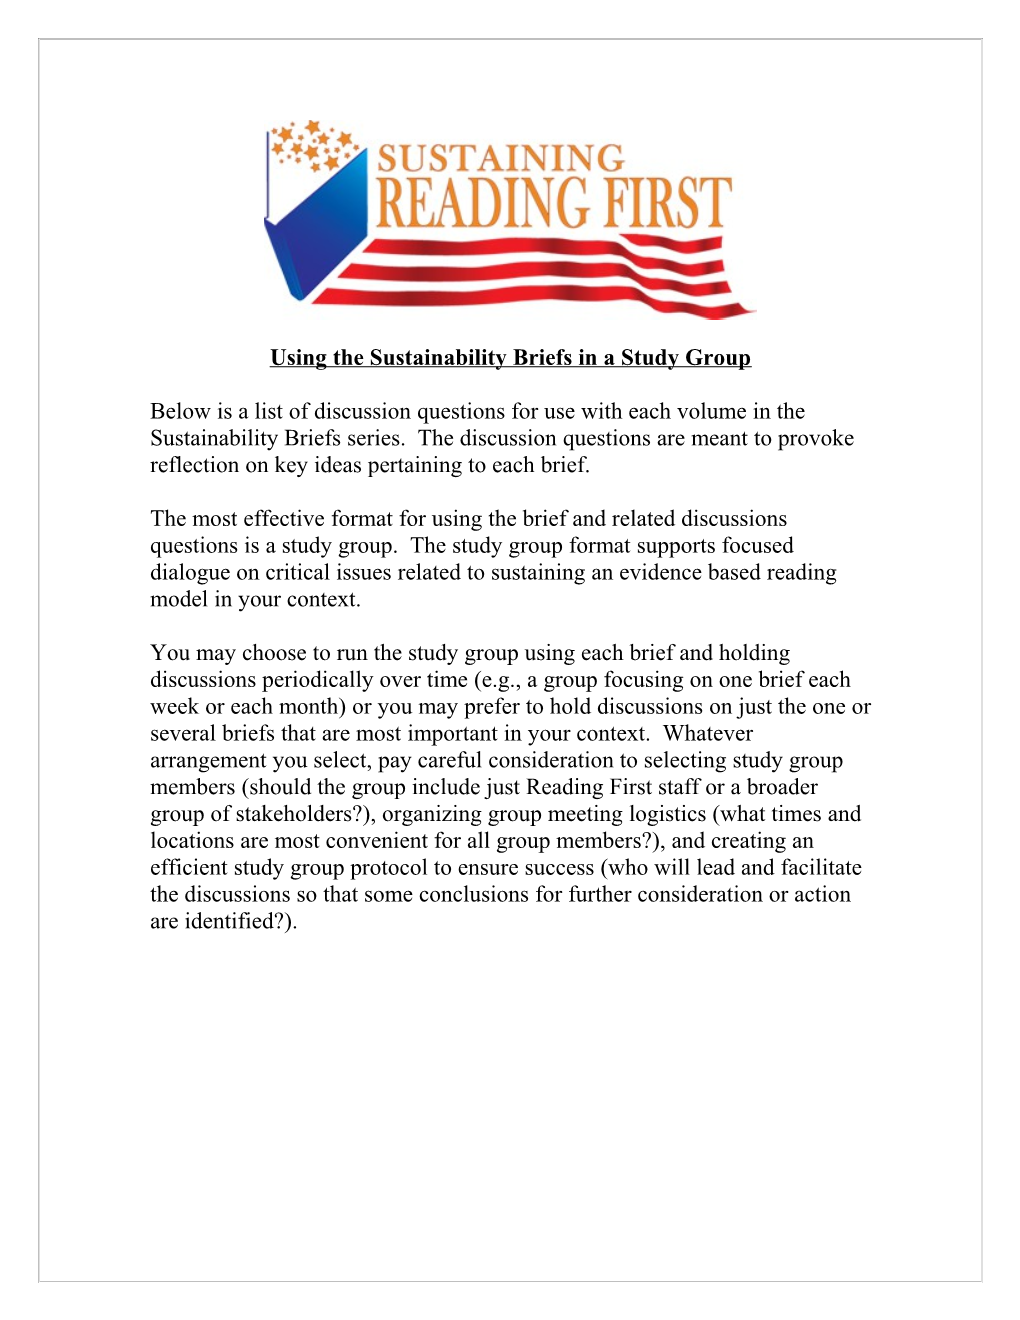 Sustaining Reading First Briefs in a Study Group (MS WORD)